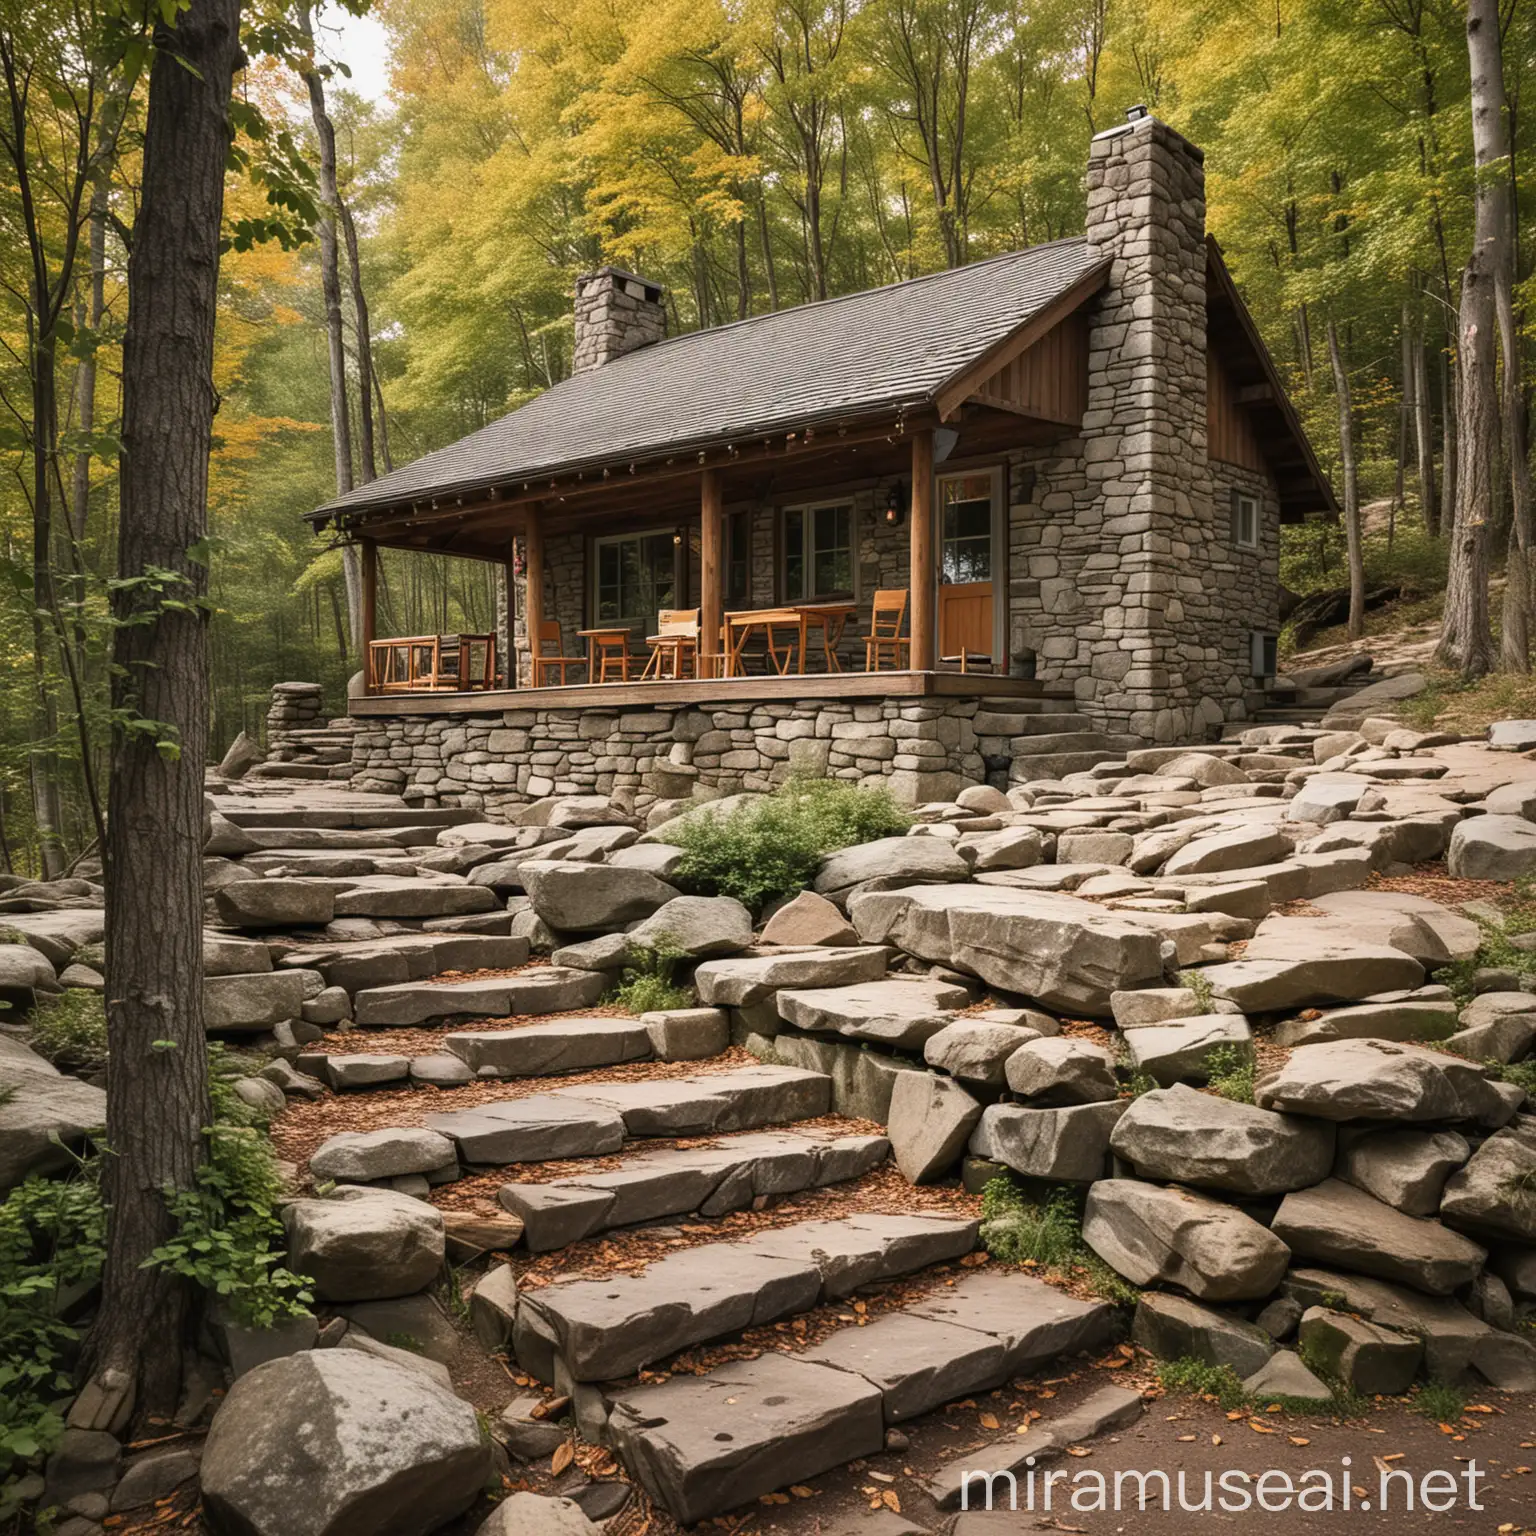  A cabin with a door and a window is situated on the stone steps, with a picnic table to the right. It's surrounded by rocky terrain and some woods.